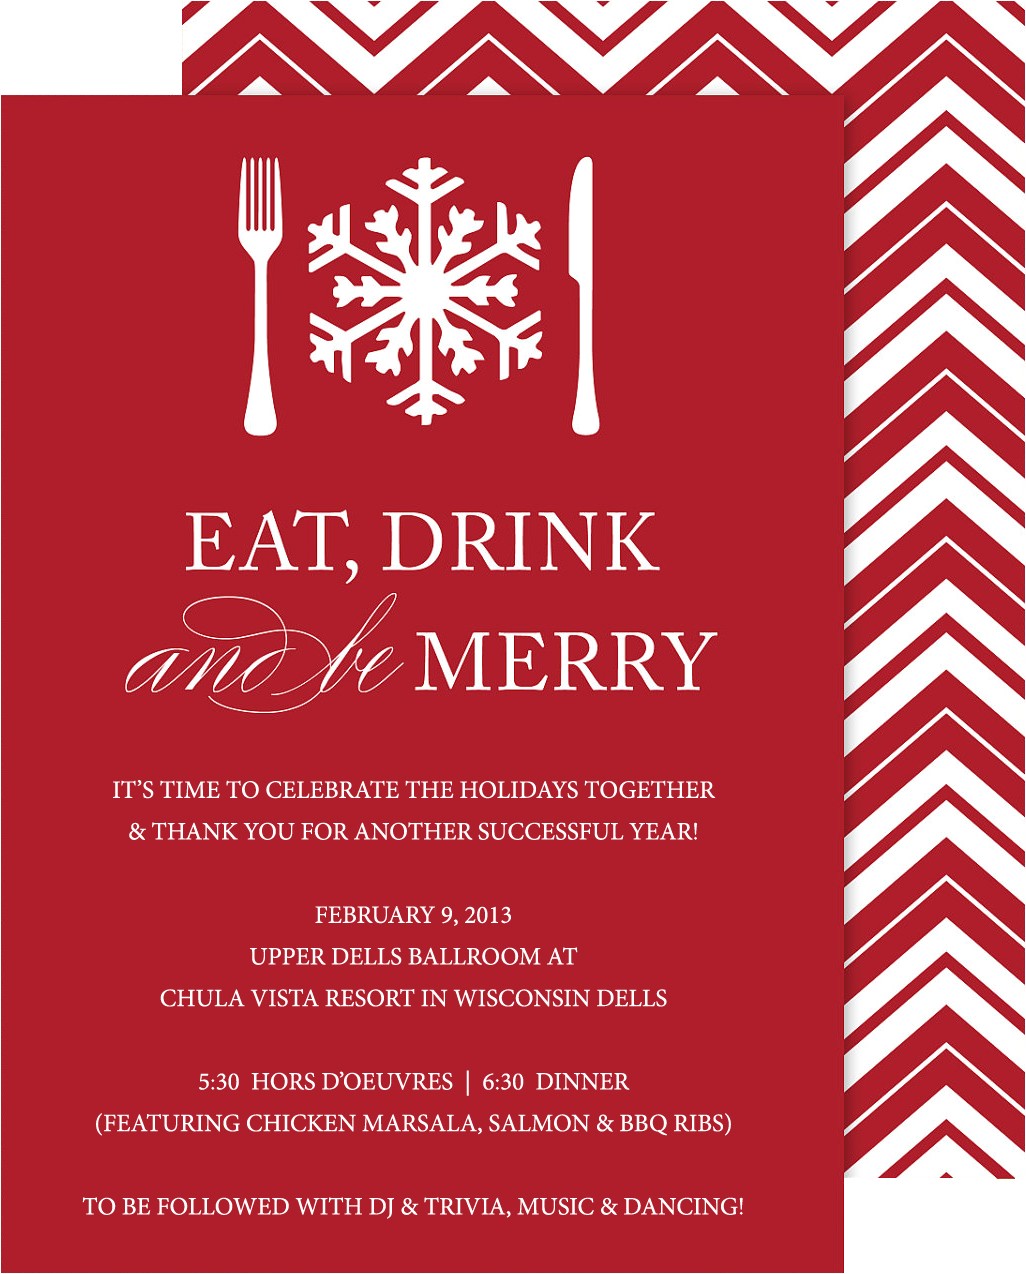 cheap christmas party invitations with red color background ideas cheap free christmas party invitations with red color background